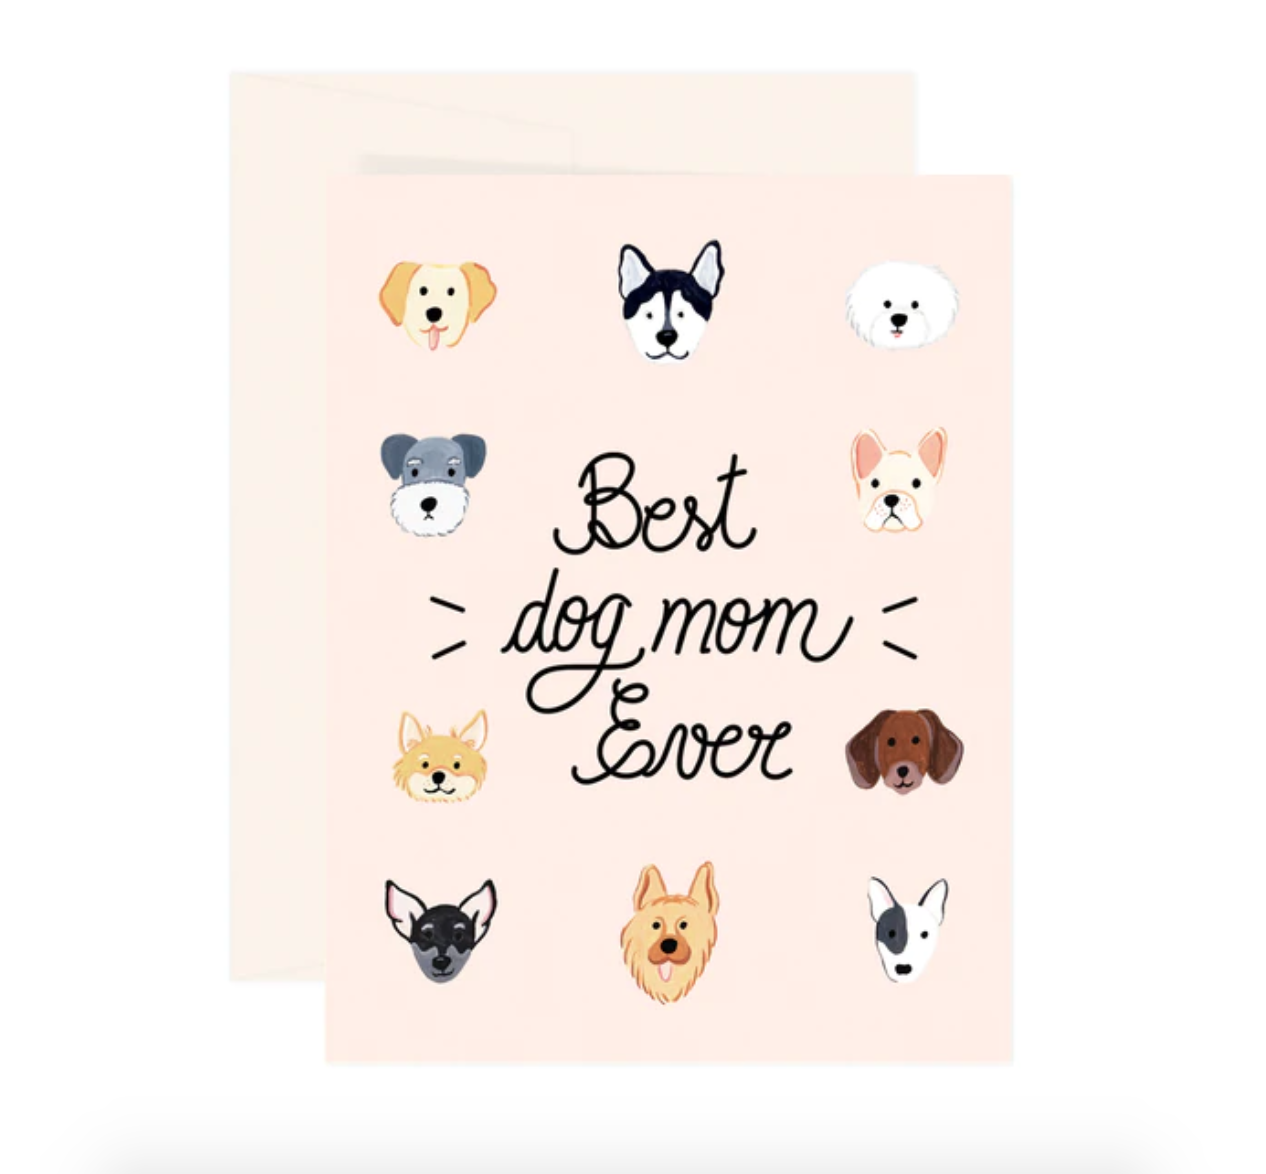 Paige & Willow Greeting Card - Dog Mom